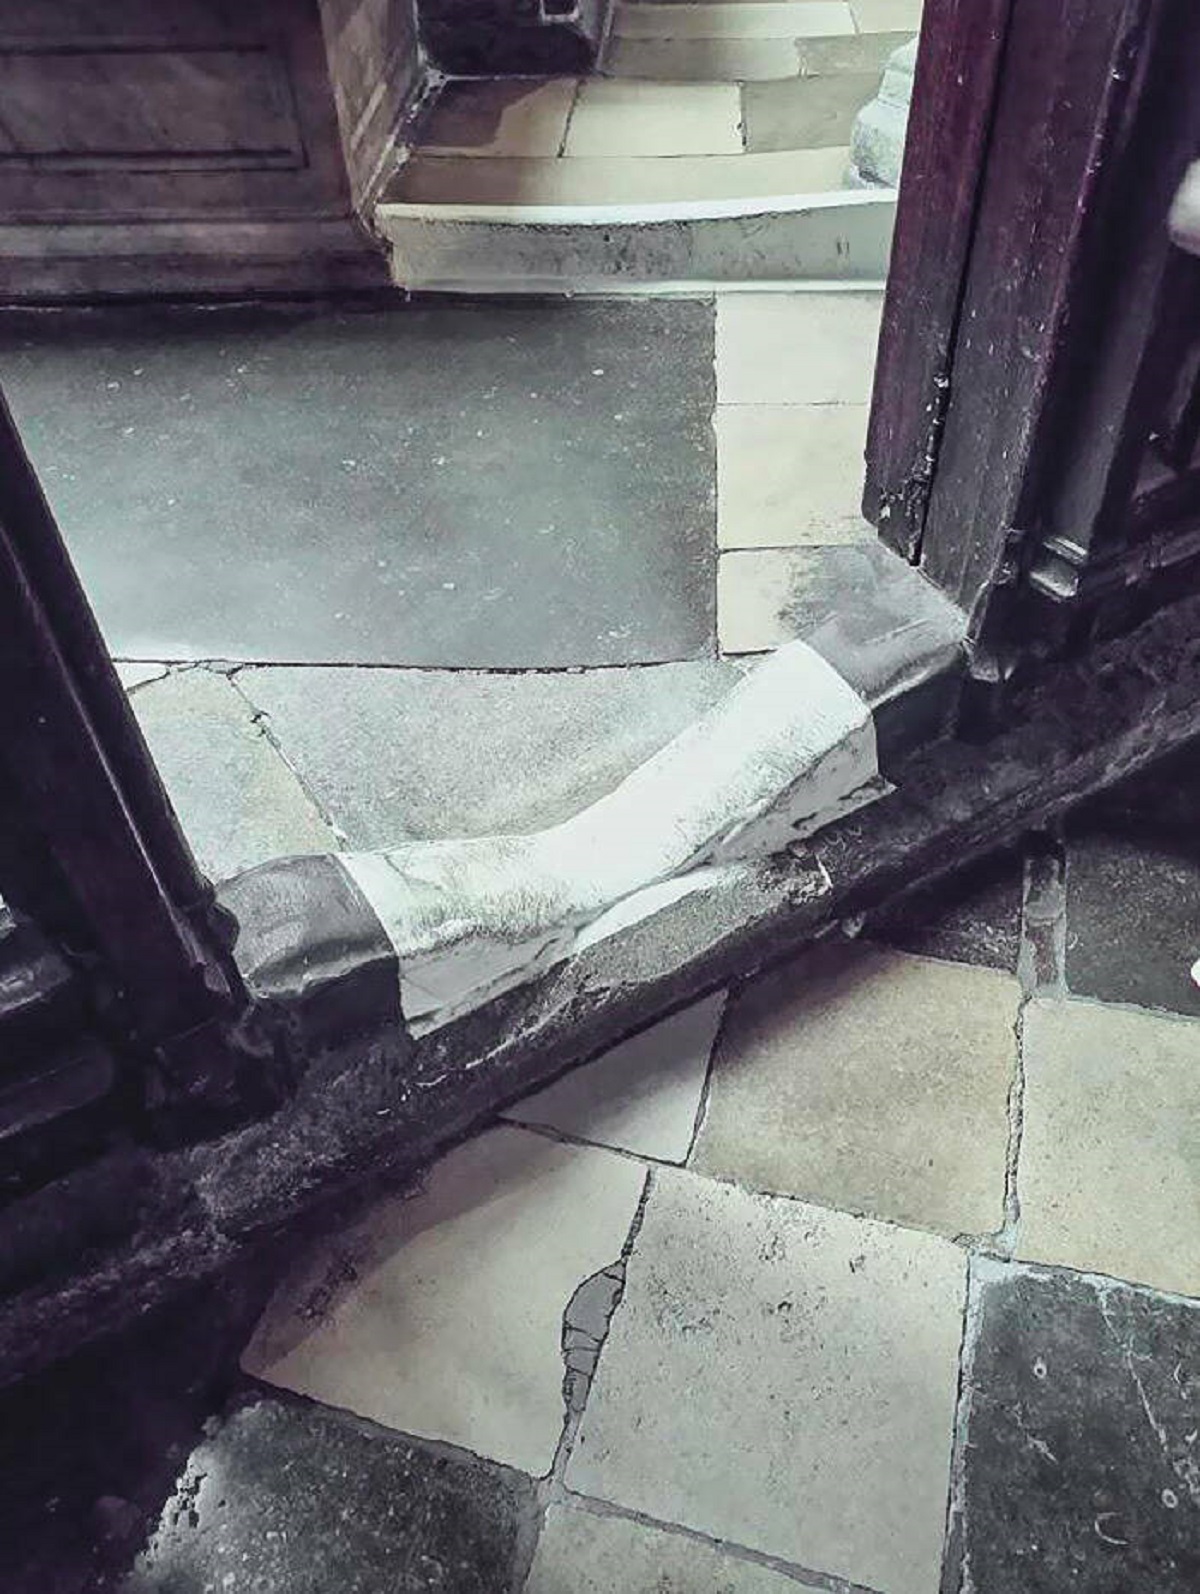 "The Well-Worn Groove On This Step At Westminster Abbey, After 800 Or So Years Of Visitors"